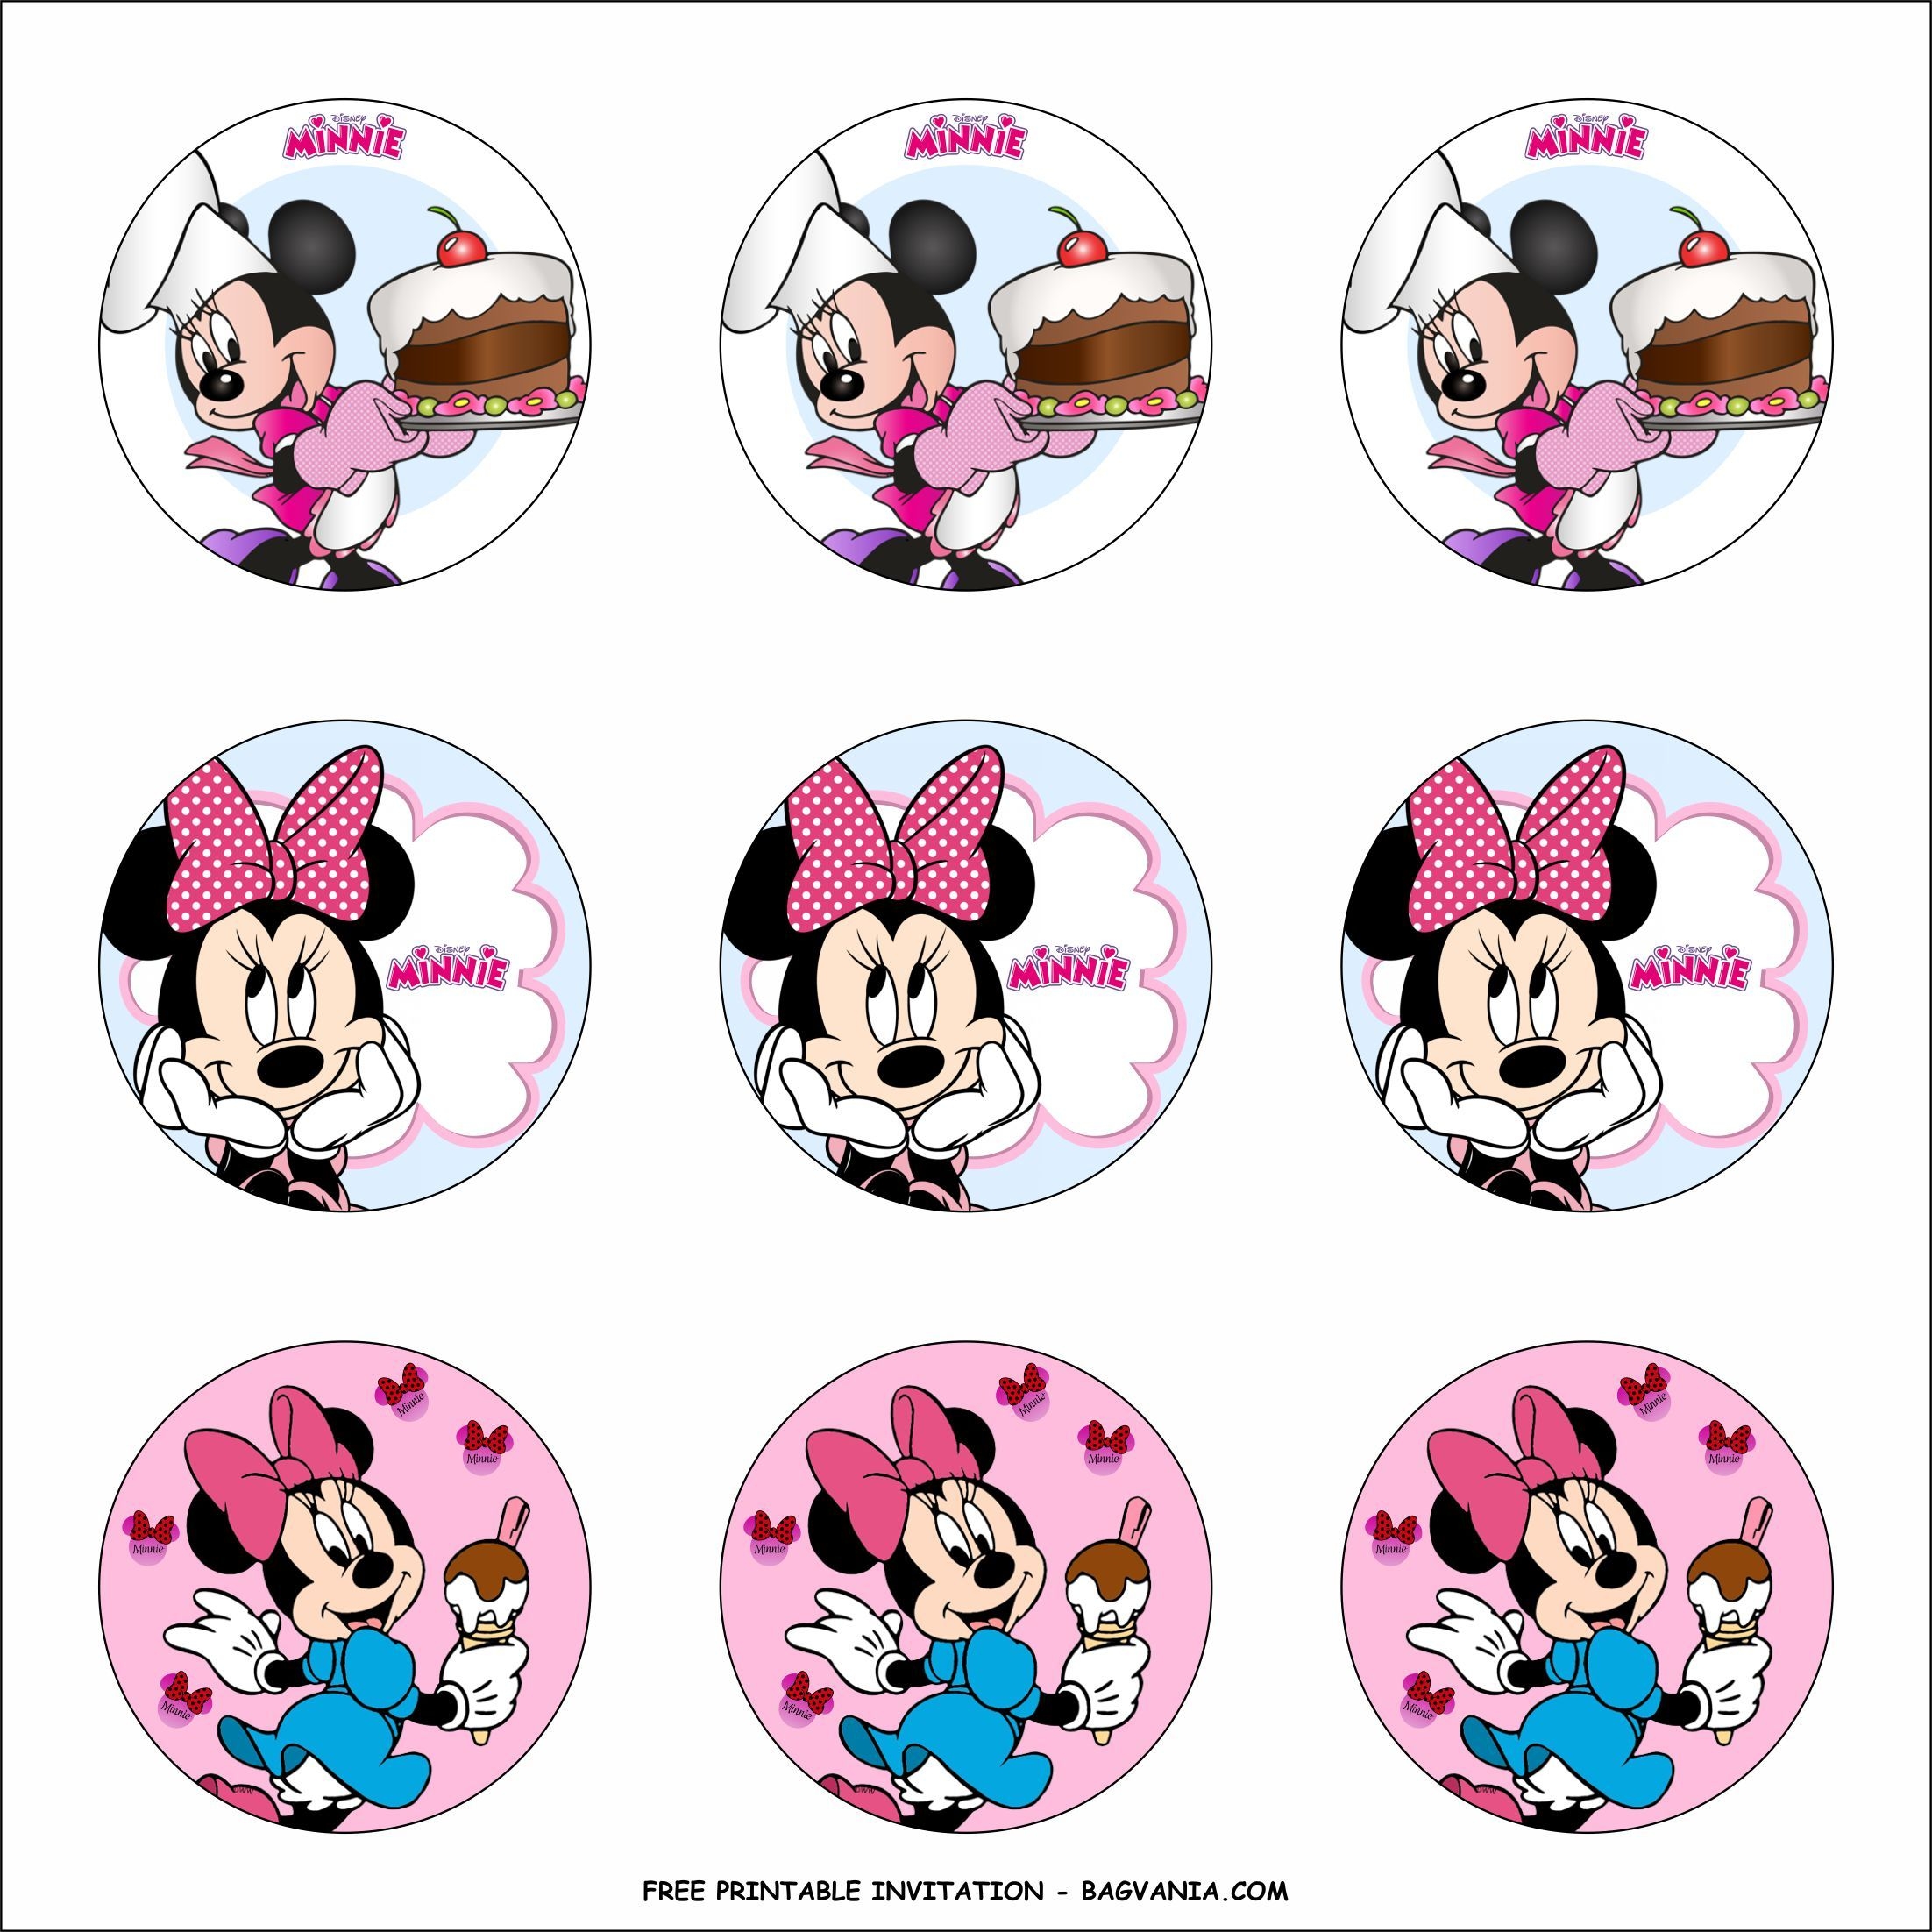 Free Printable Lovely Minnie Mouse Birthday Party Kit Templates Minnie Mouse Cupcakes Minnie Mouse Cupcake Toppers Minnie Mouse Birthday Party